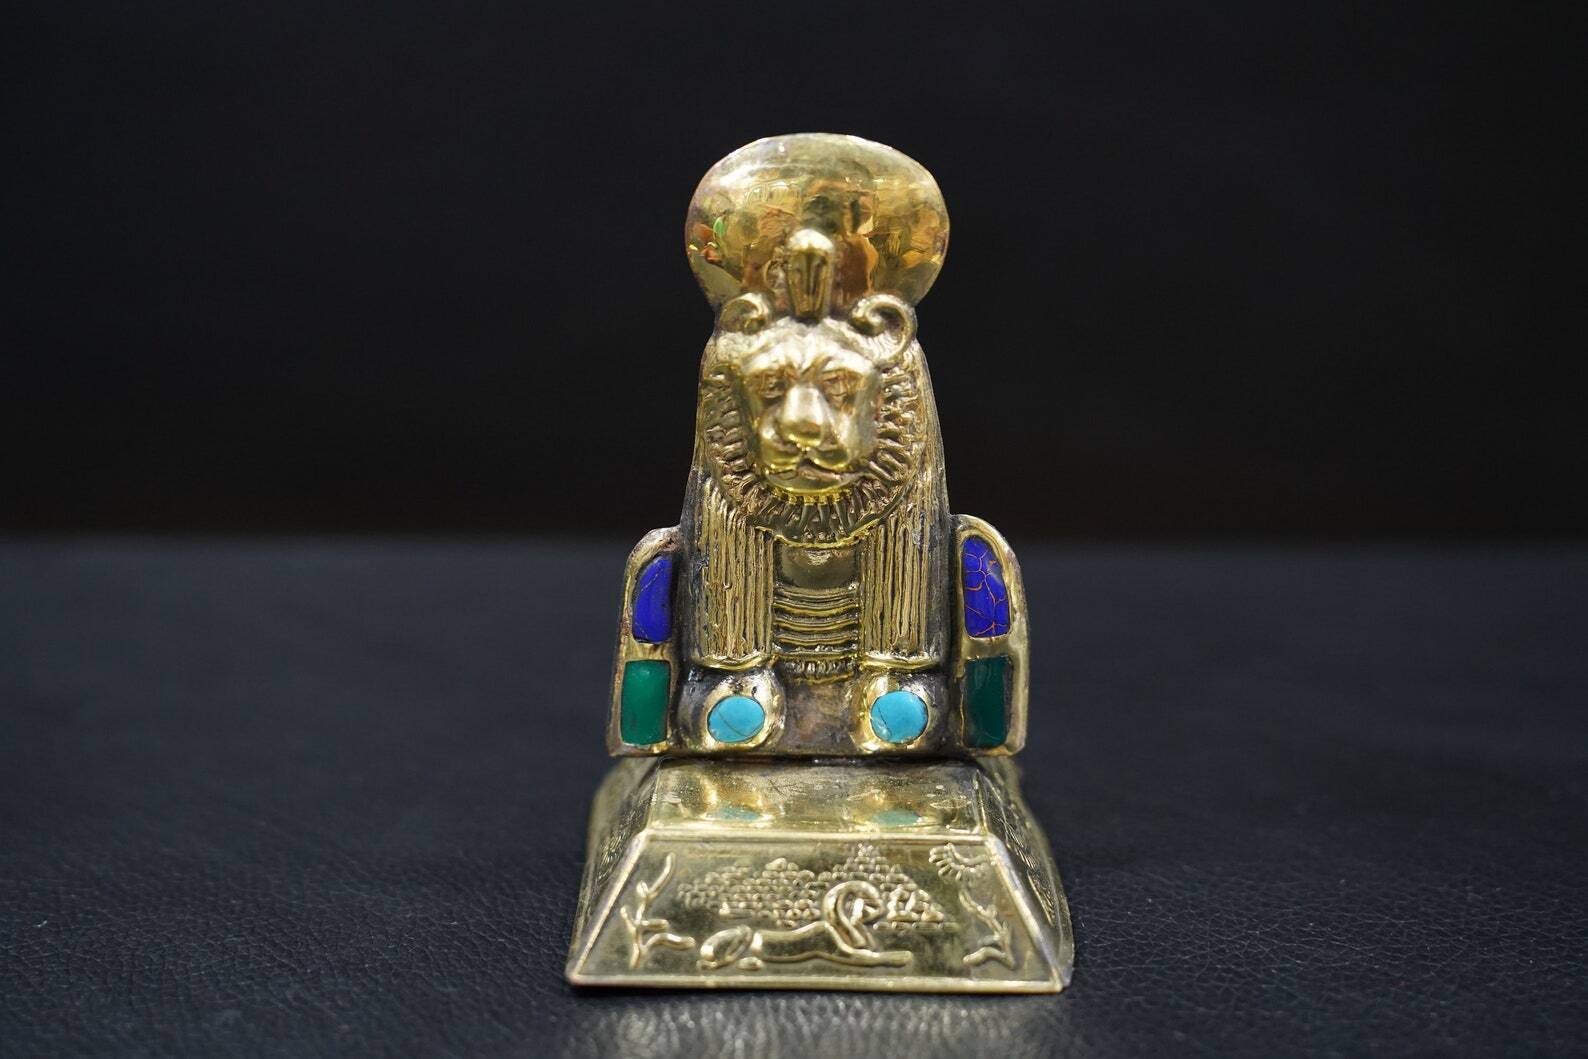 Sekhmet: Lioness of Divine Wrath and Healing Light